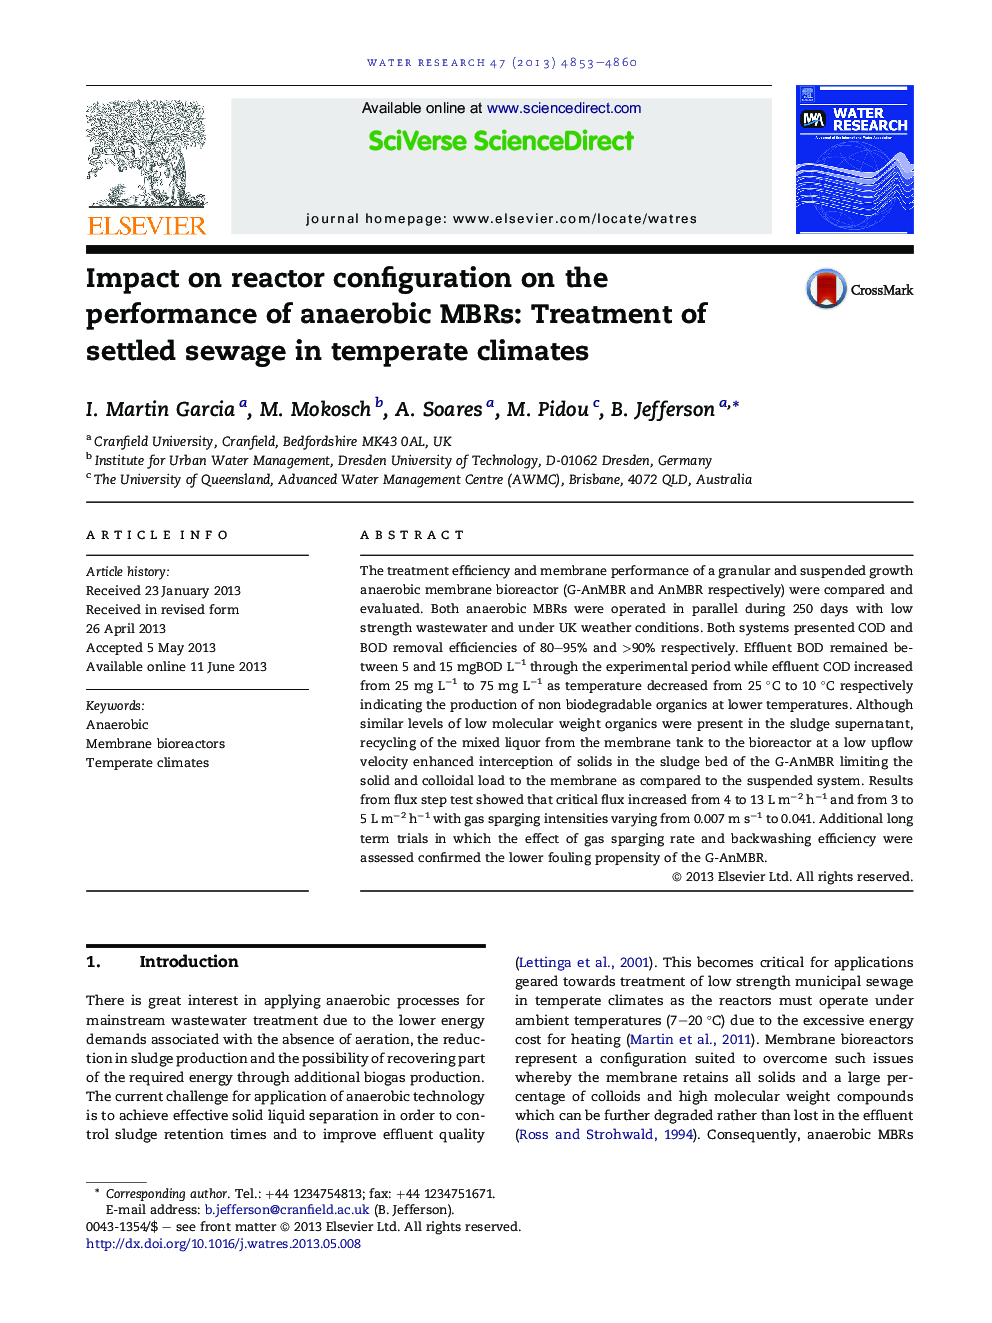 Impact on reactor configuration on the performance of anaerobic MBRs: Treatment of settled sewage in temperate climates